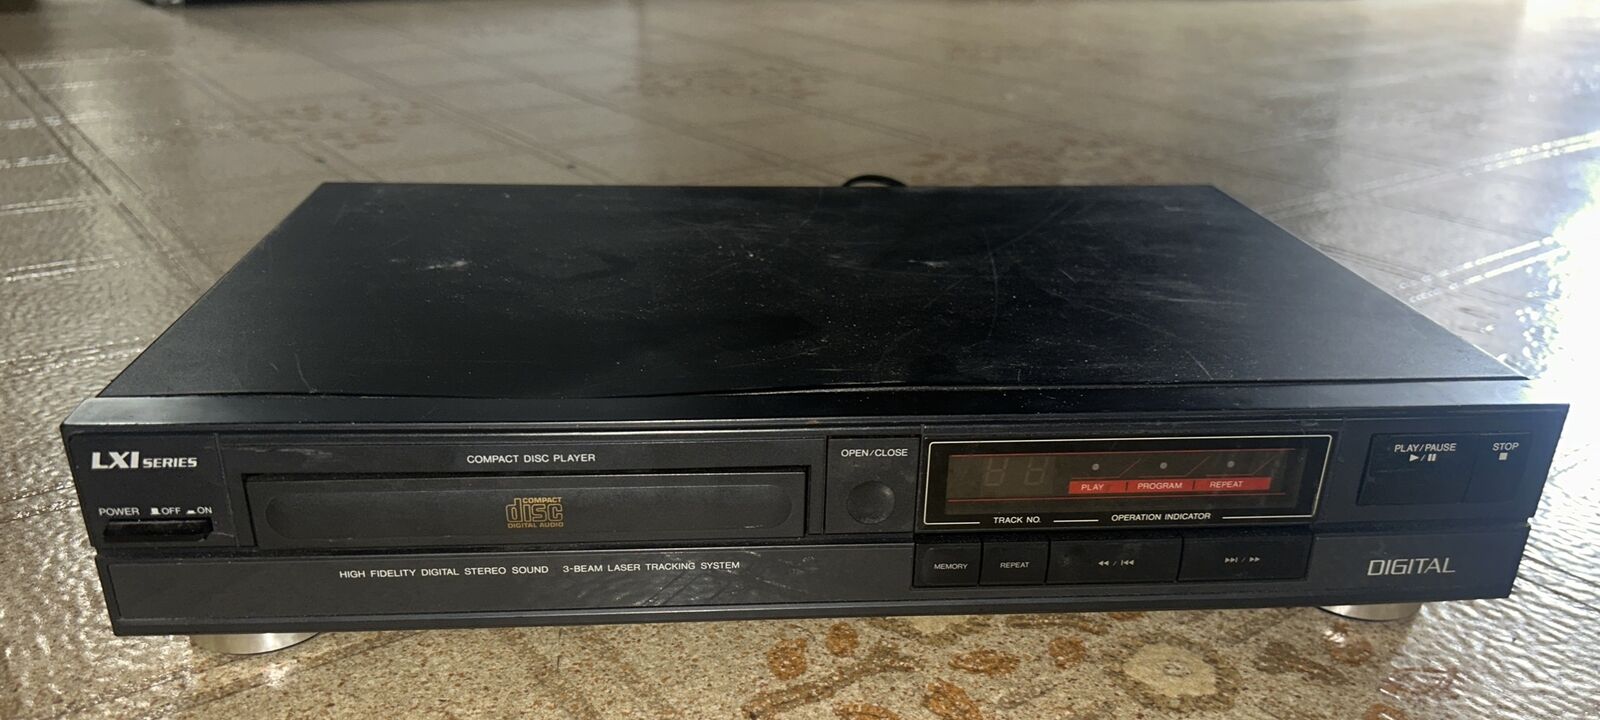 Rare Vintage Sears LXI Series CD Player Model 564.97525950 - Tested & Working